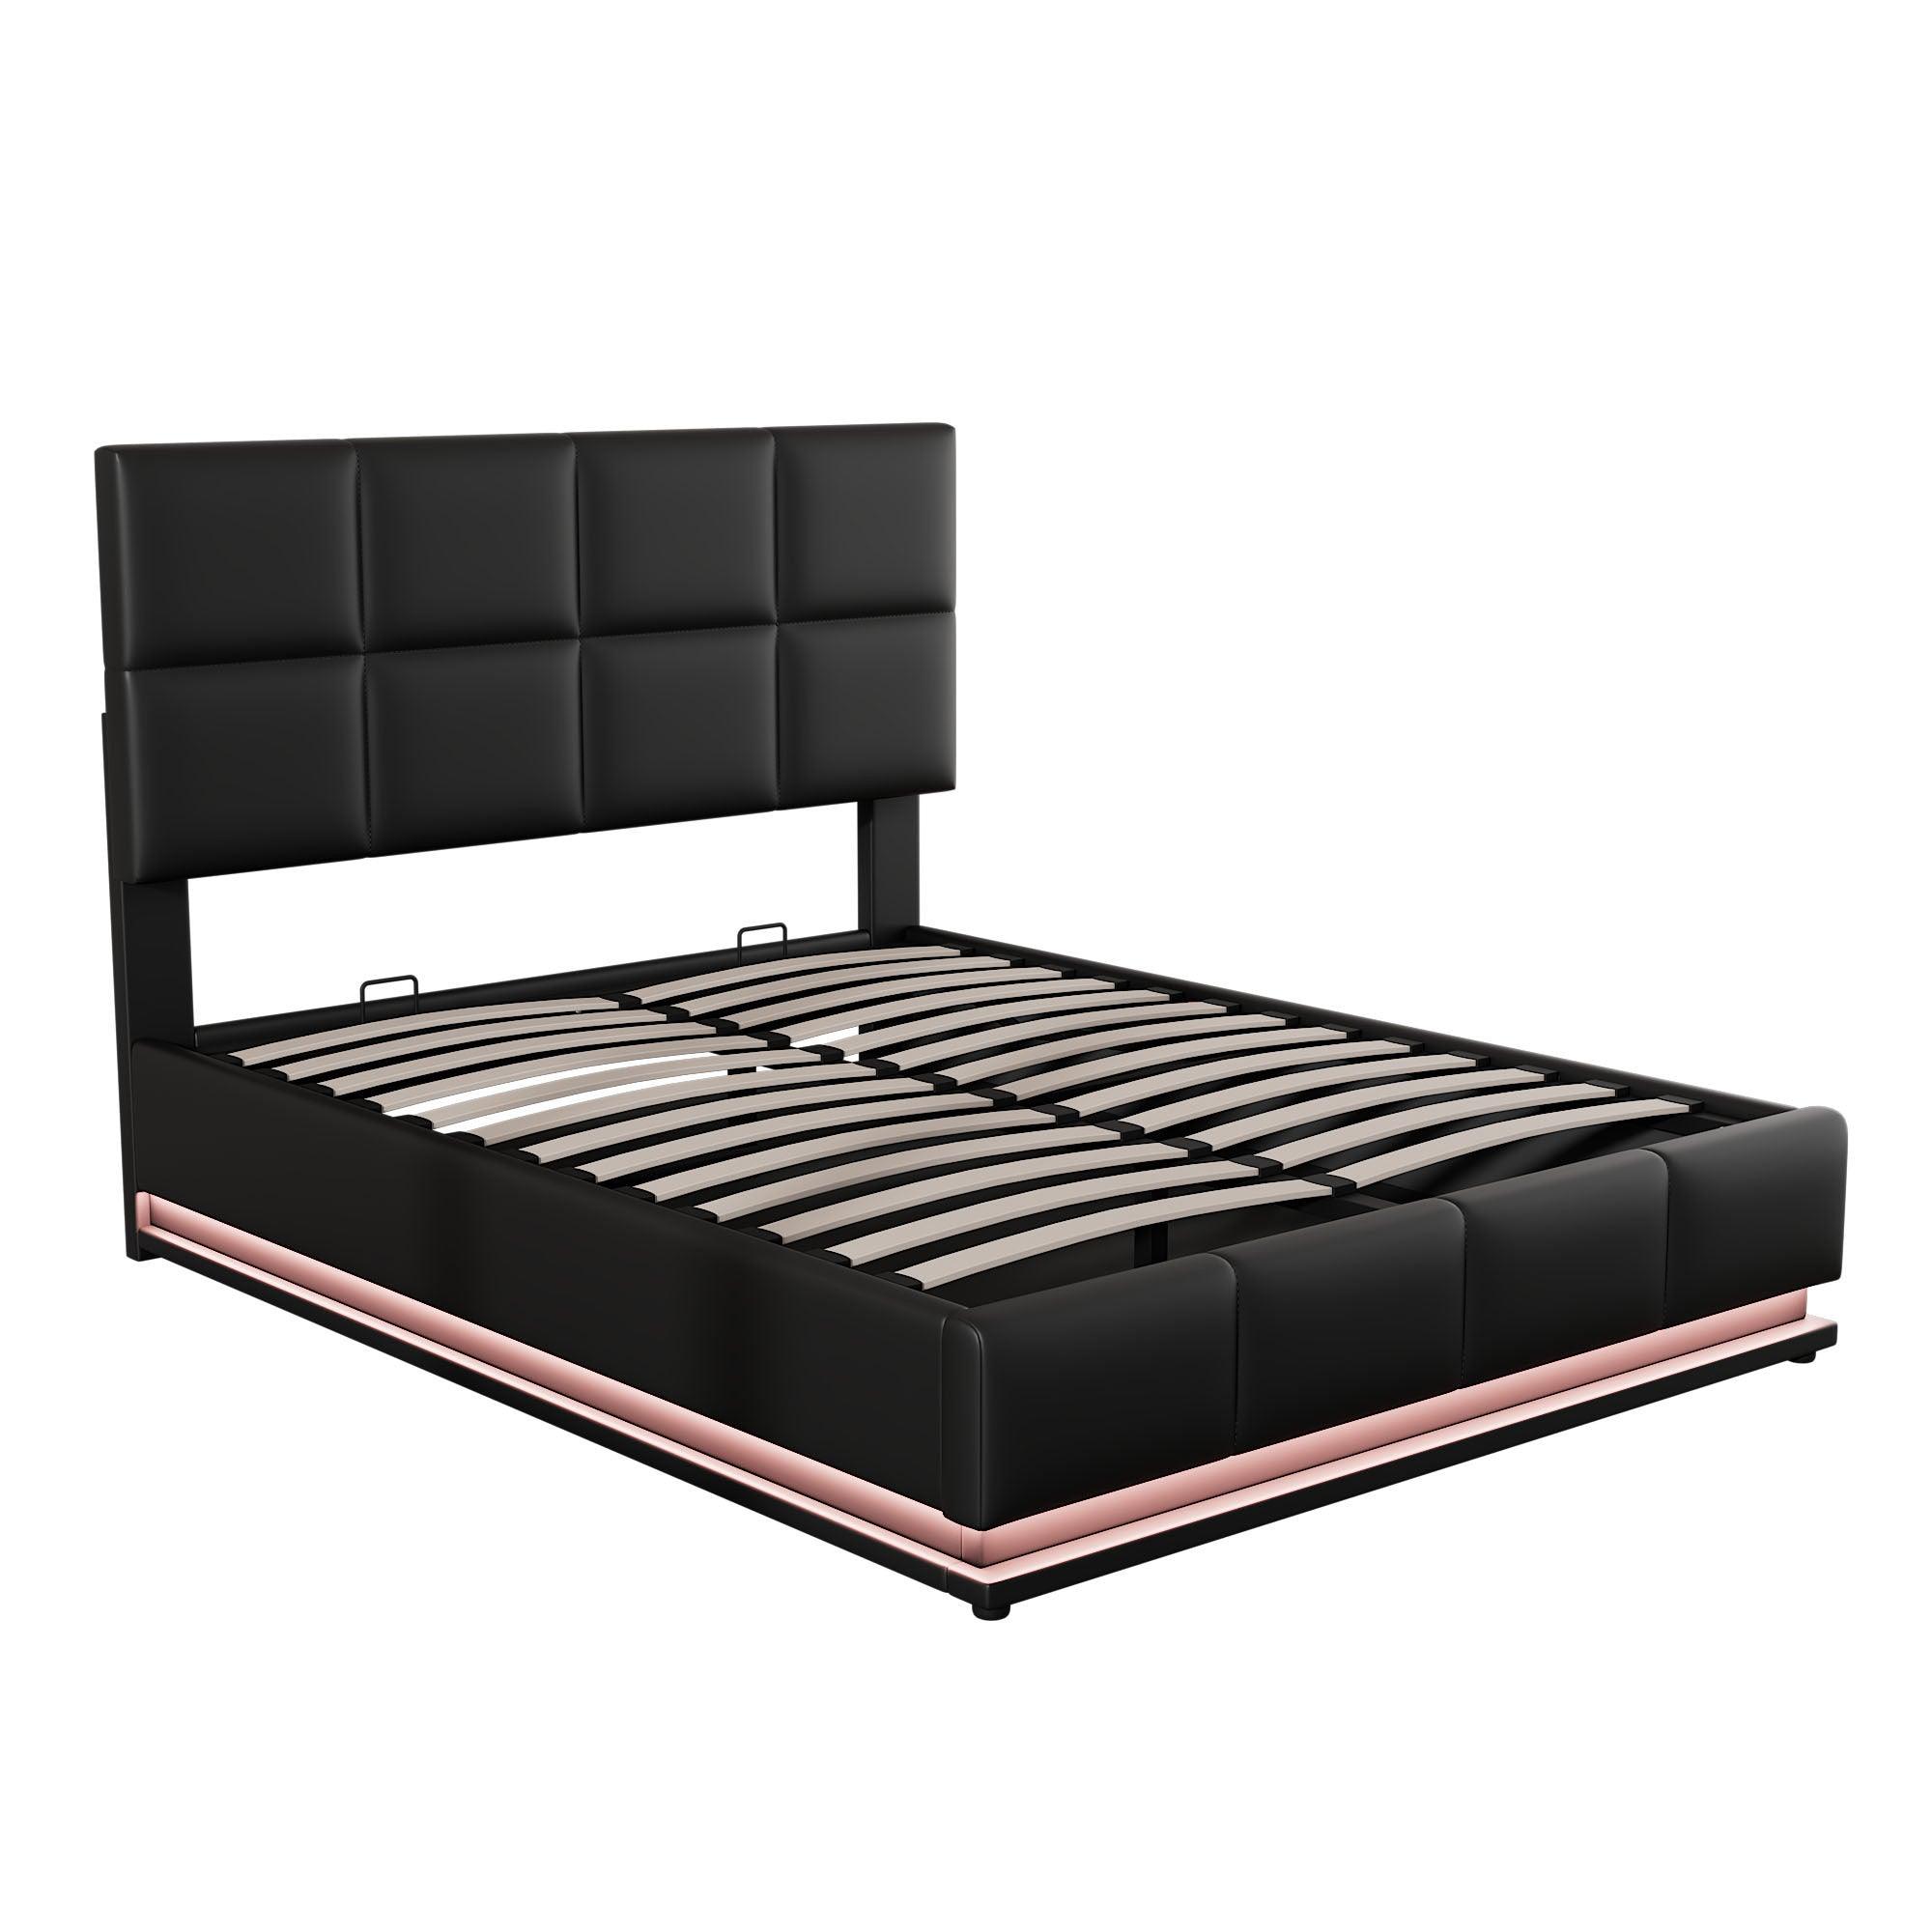 Full Size Tufted Upholstered Platform Bed with Hydraulic Storage System, PU Storage Bed with LED Lights and USB charger, Black